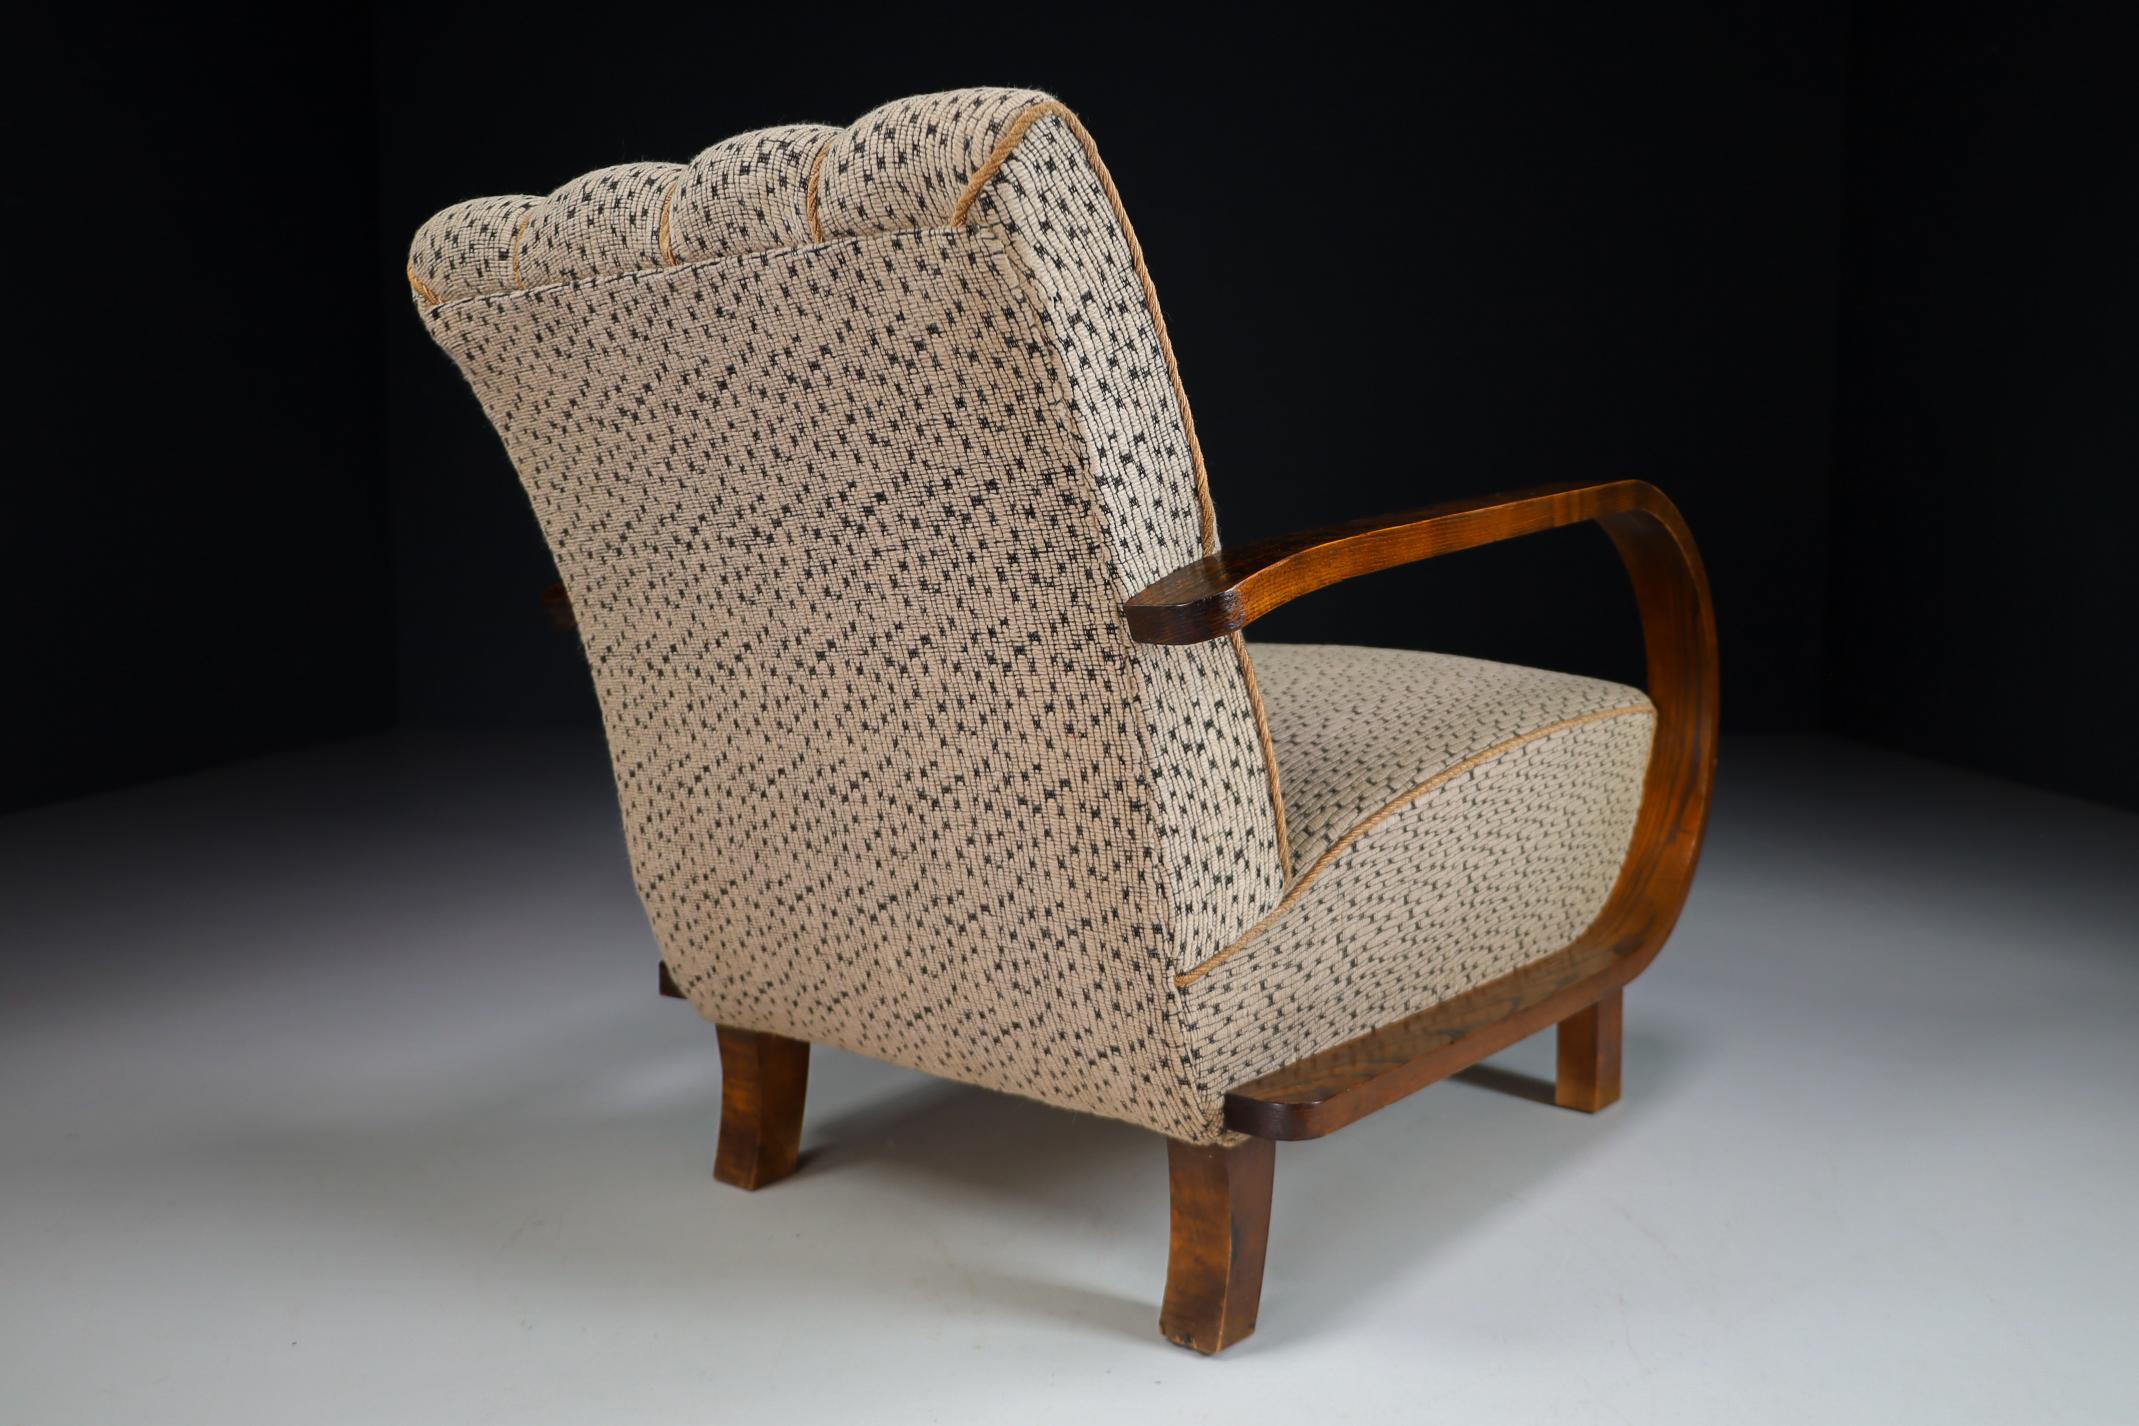 Art Deco Art-Deco Armchairs in Bentwood and Original Fabric, Austria, 1930s For Sale